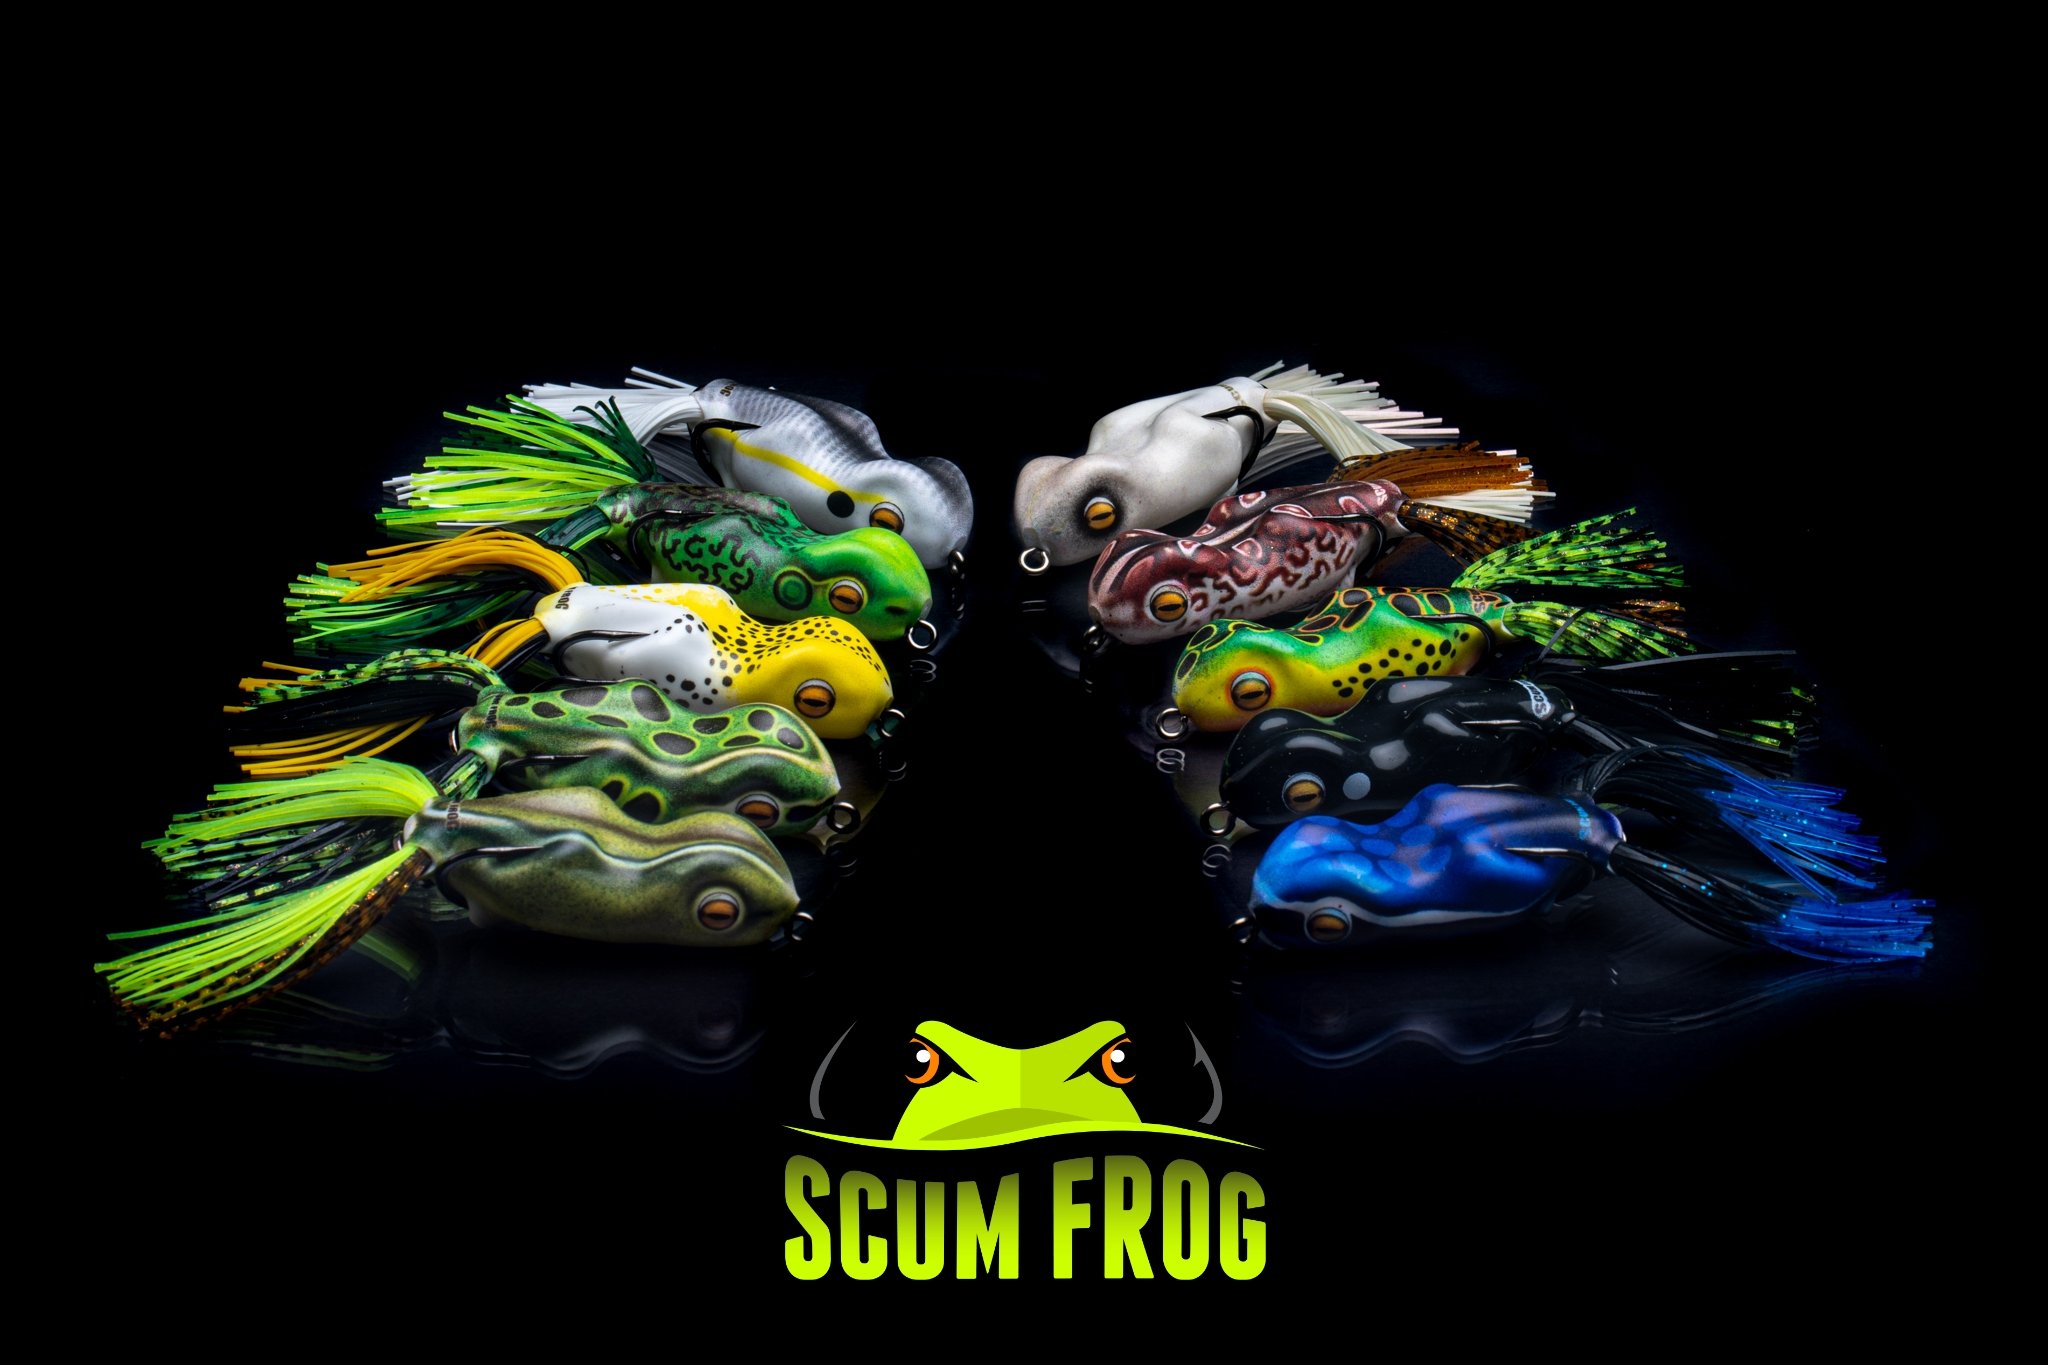 All New Realistic Scum Frog Painted Trophy Series Meets Angler